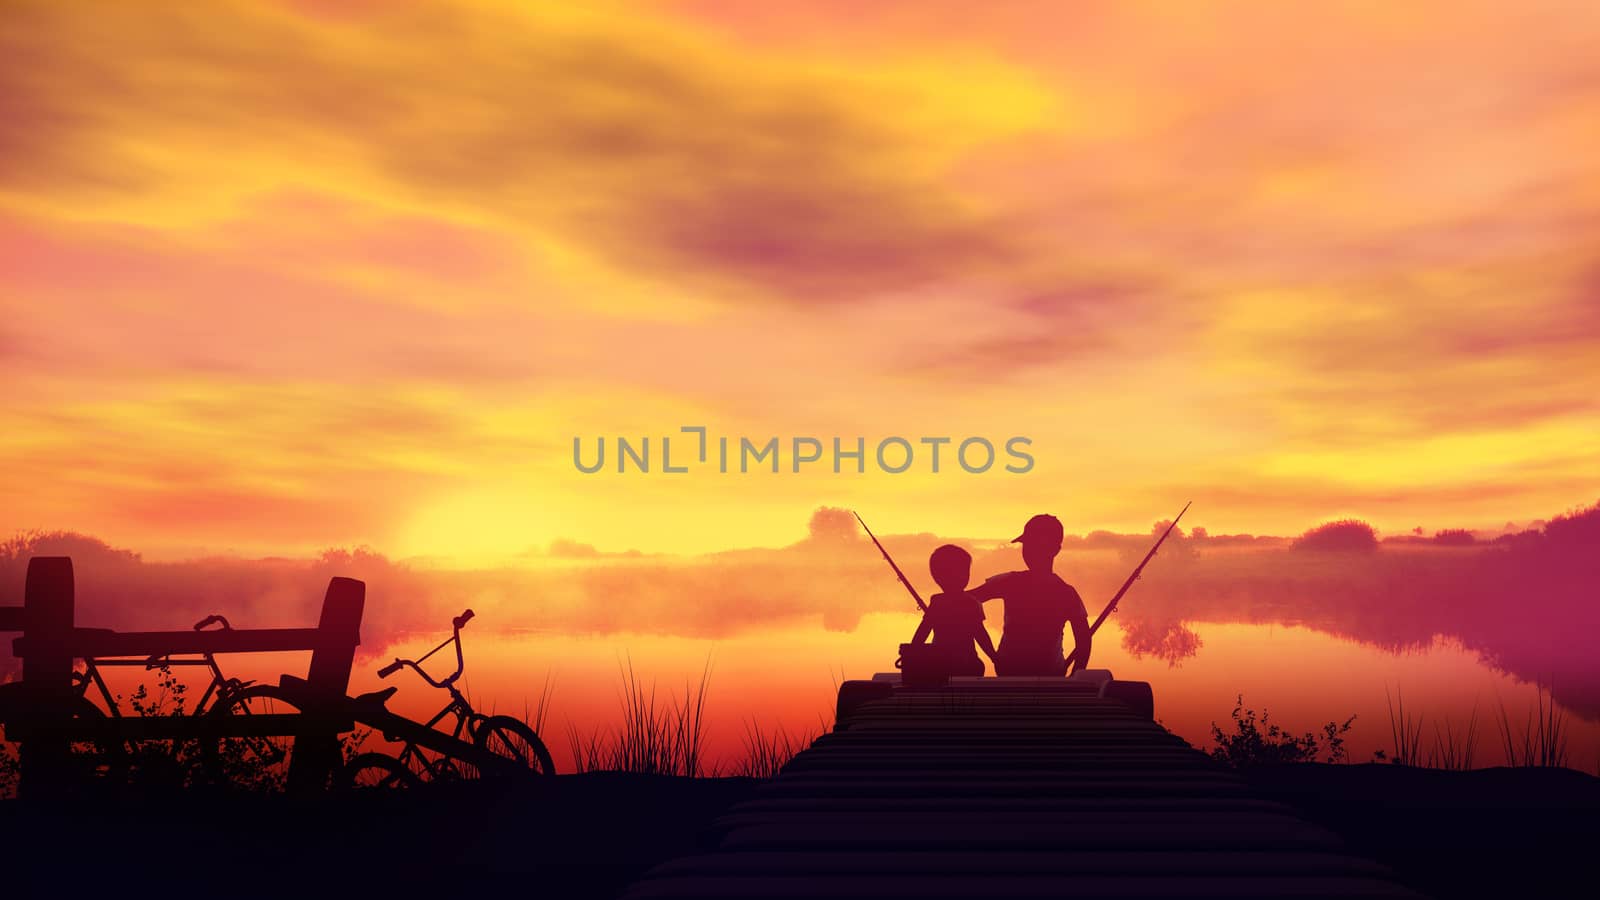 Silhouettes of two fishing boys and bicycles lie nearby on a background of a bright sunset.